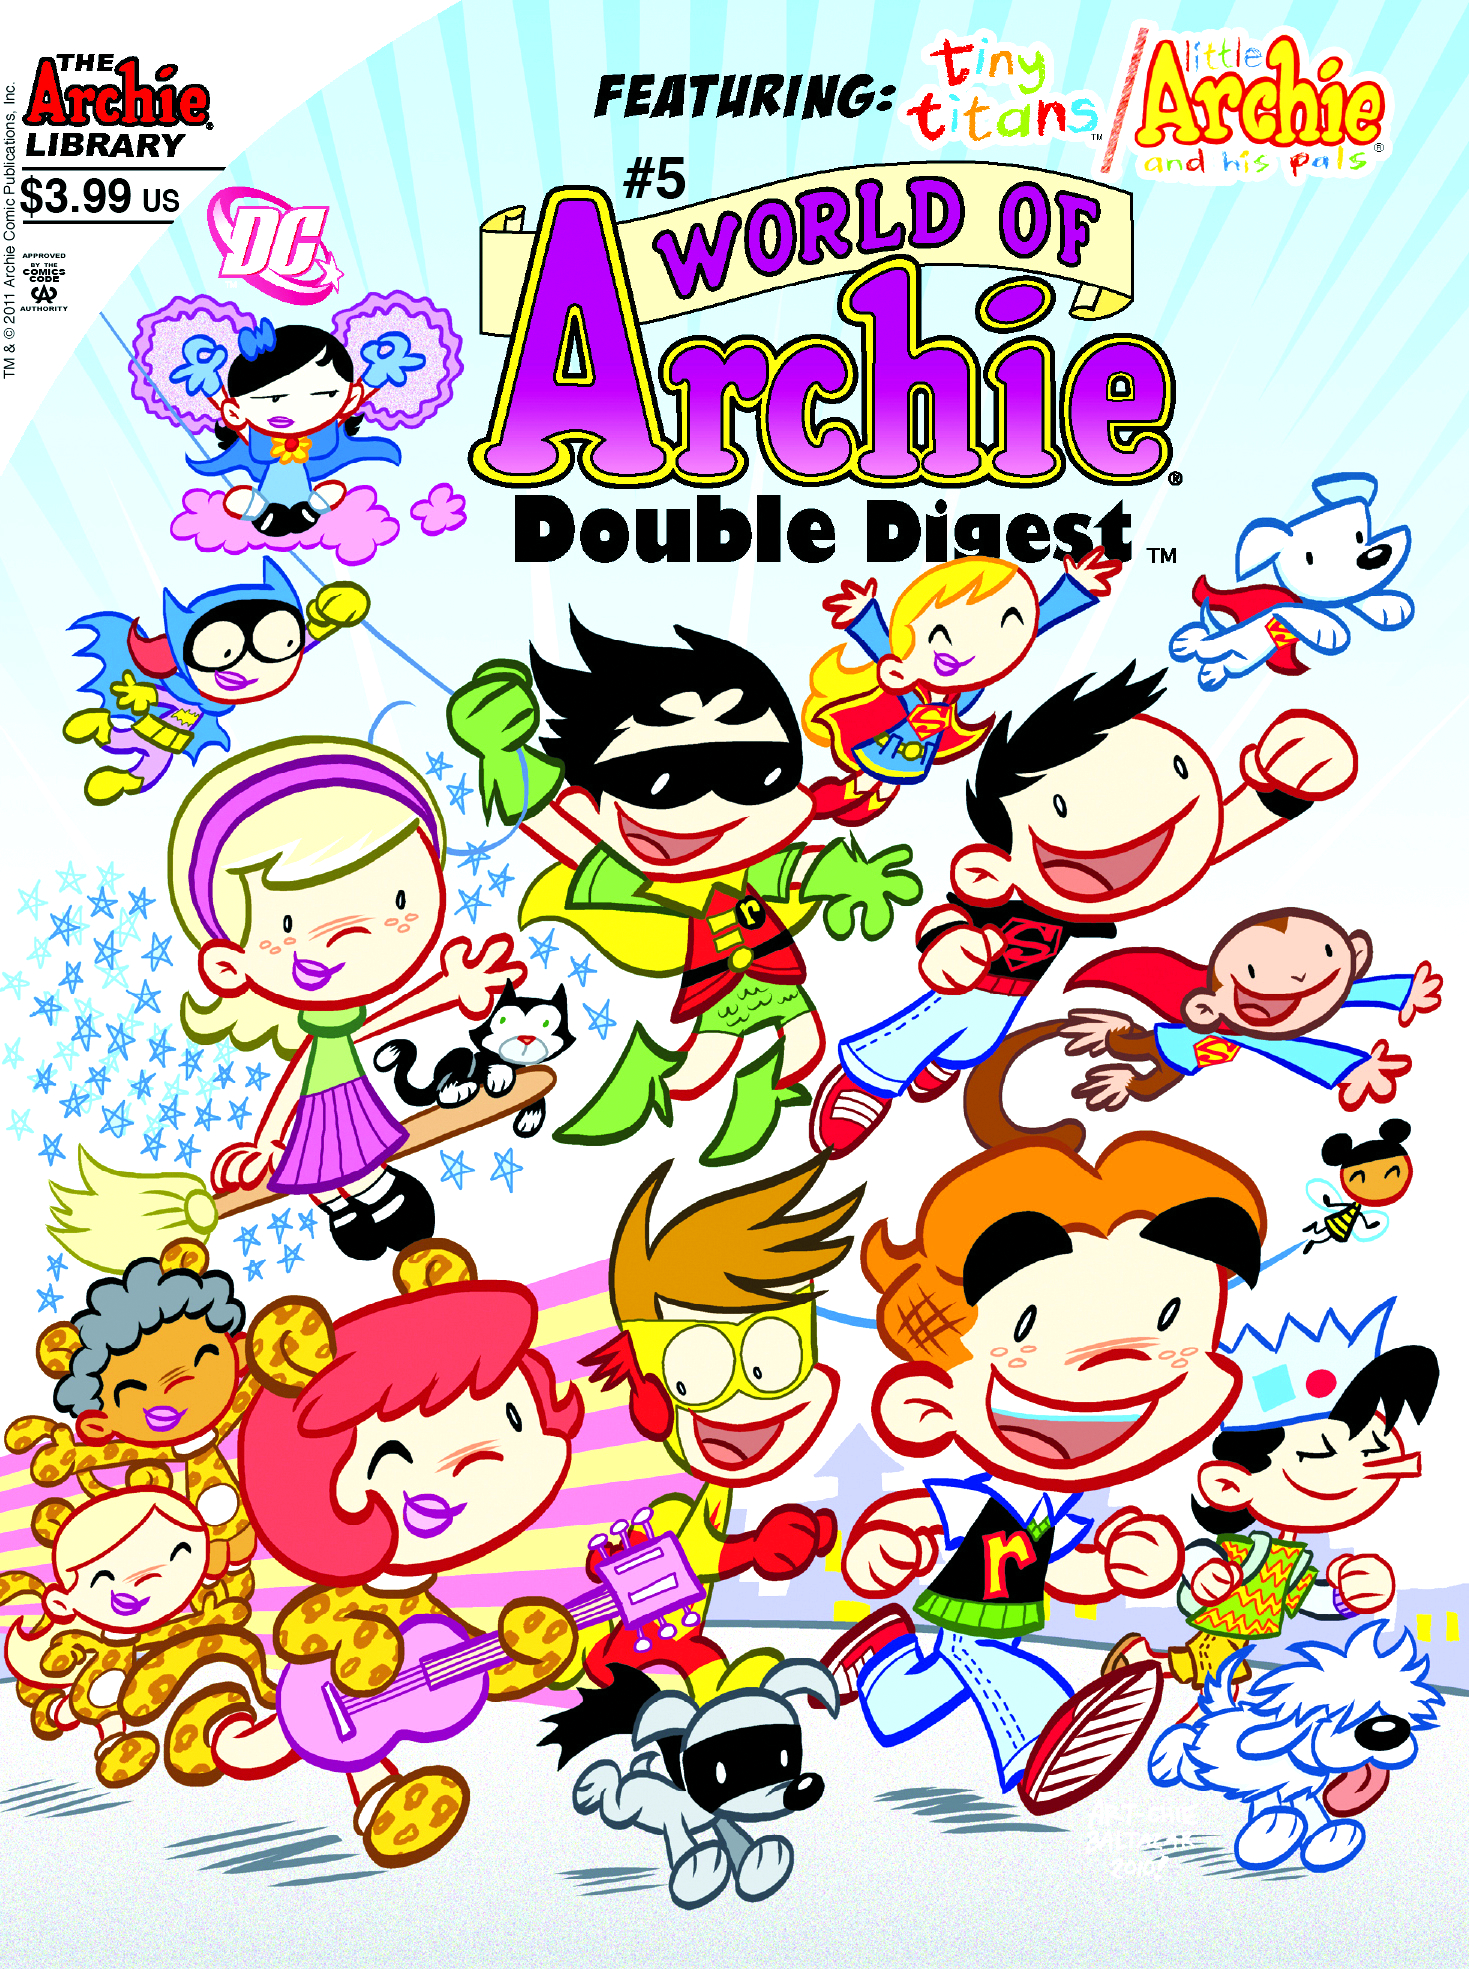 WORLD OF ARCHIE DOUBLE DIGEST #5